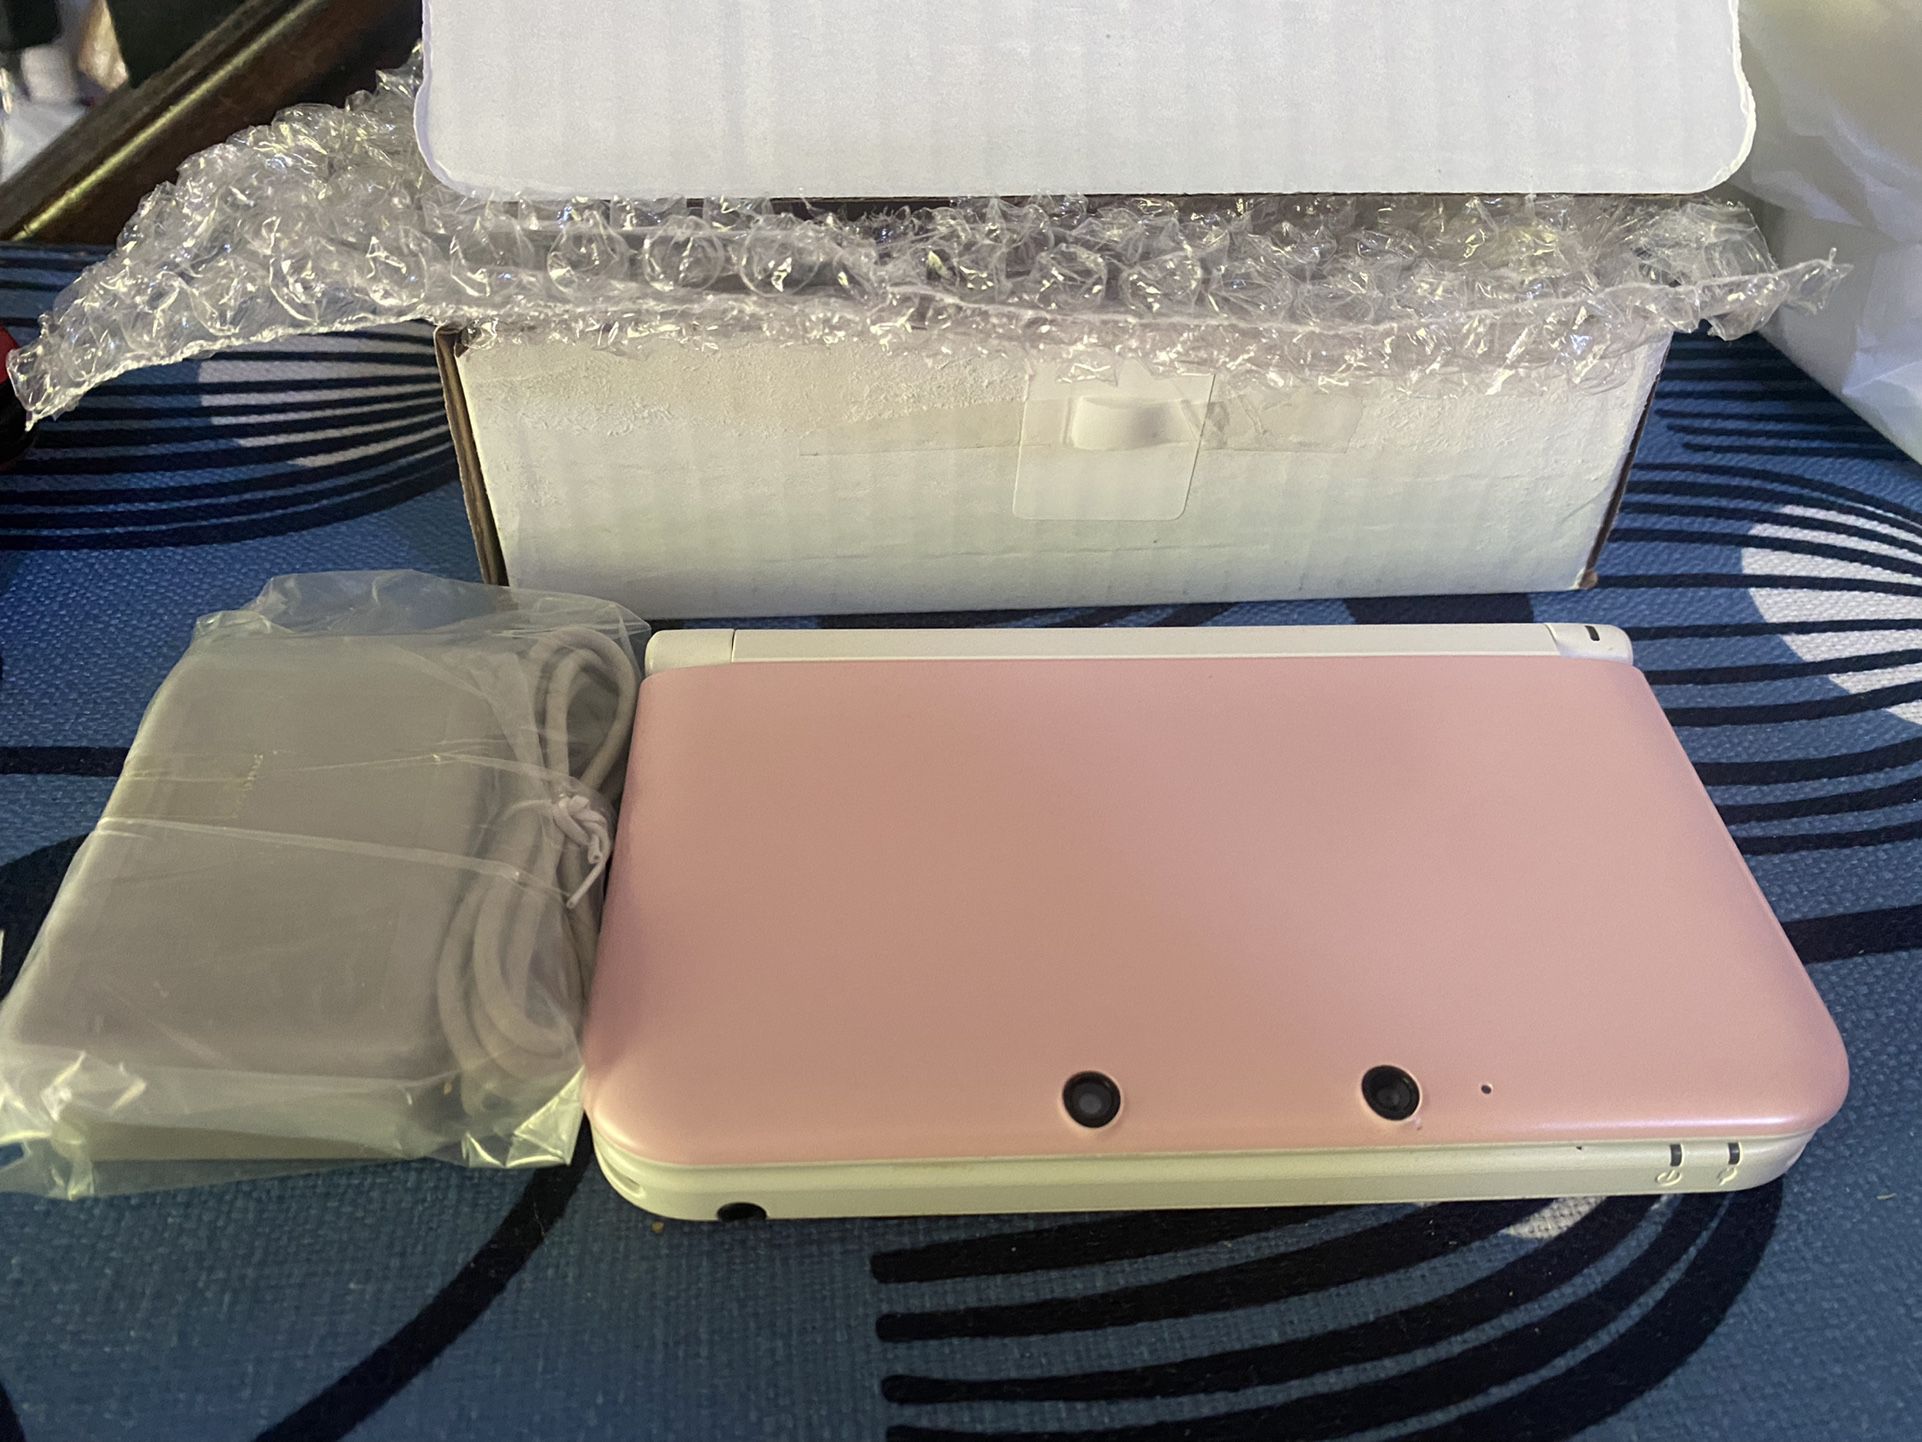 Nintendo 3DS XL Game Console Pink/white